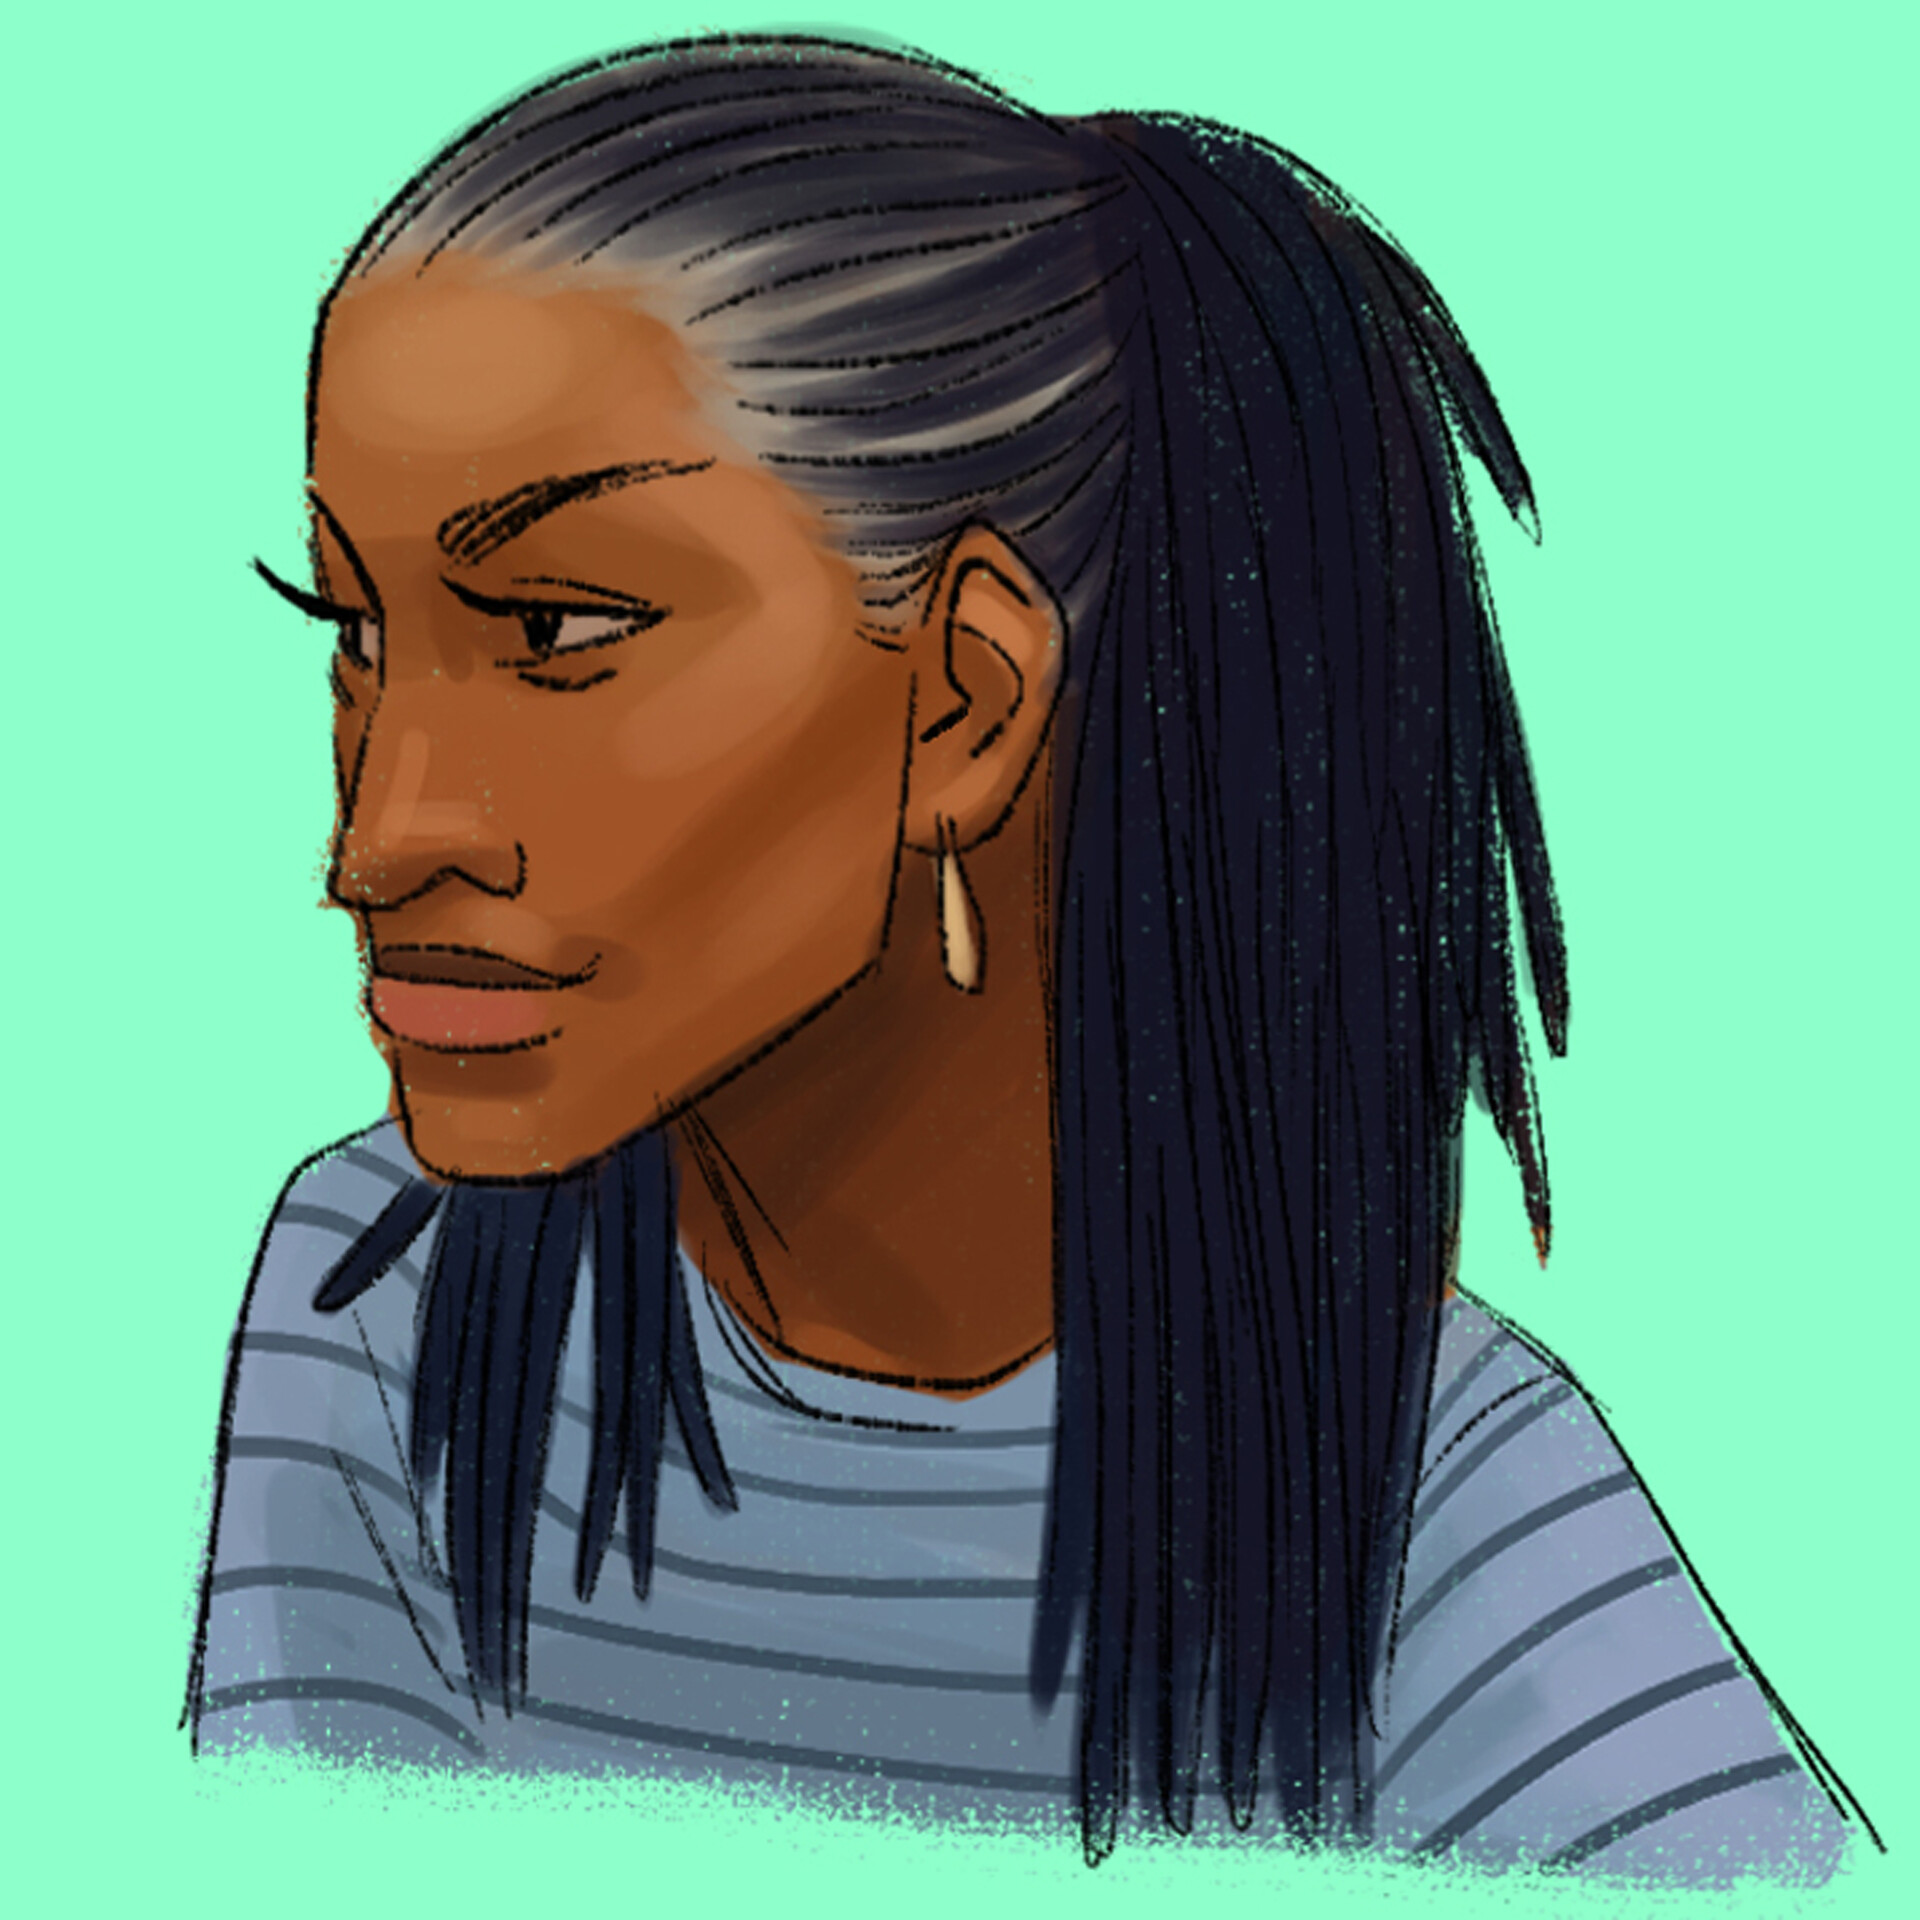 ArtStation - Sketch Collection of Black Hairstyles